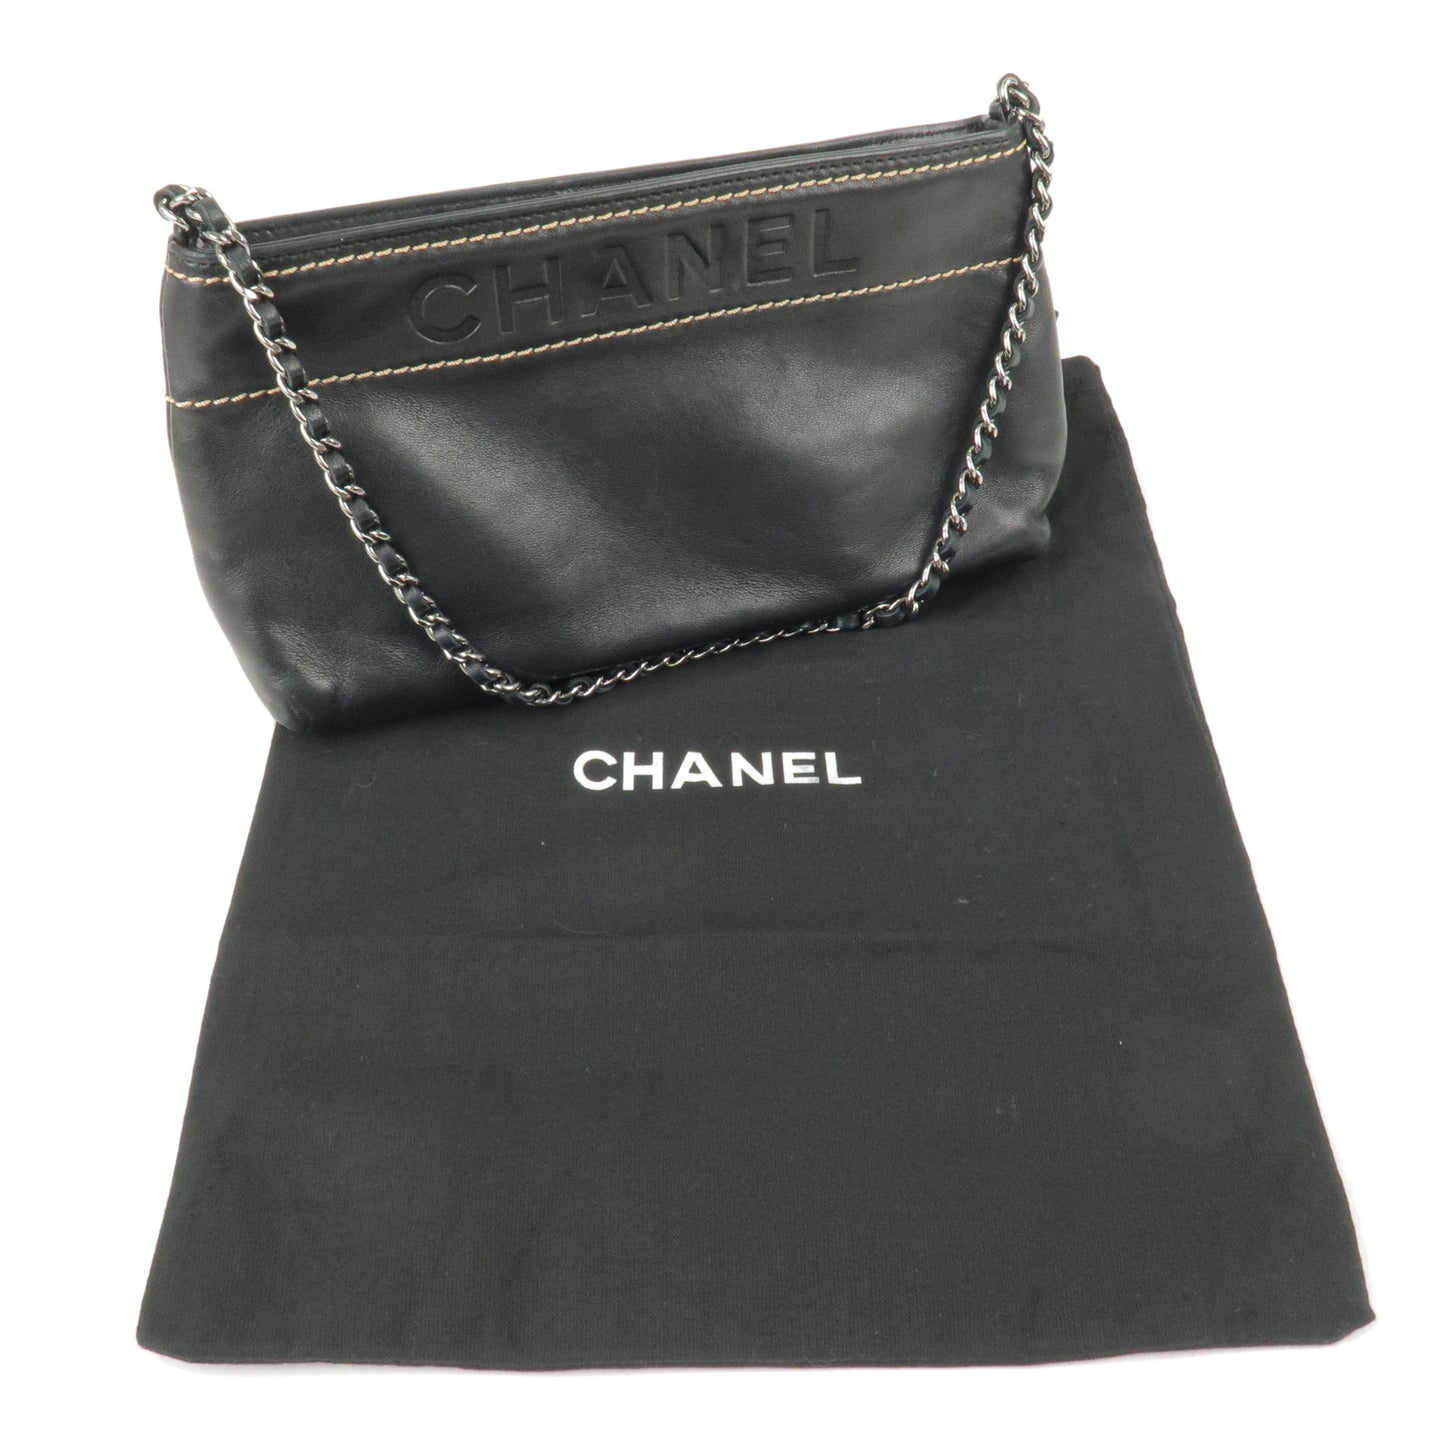 CHANEL Leather Chain Accessory Pouch Black Silver Hardware